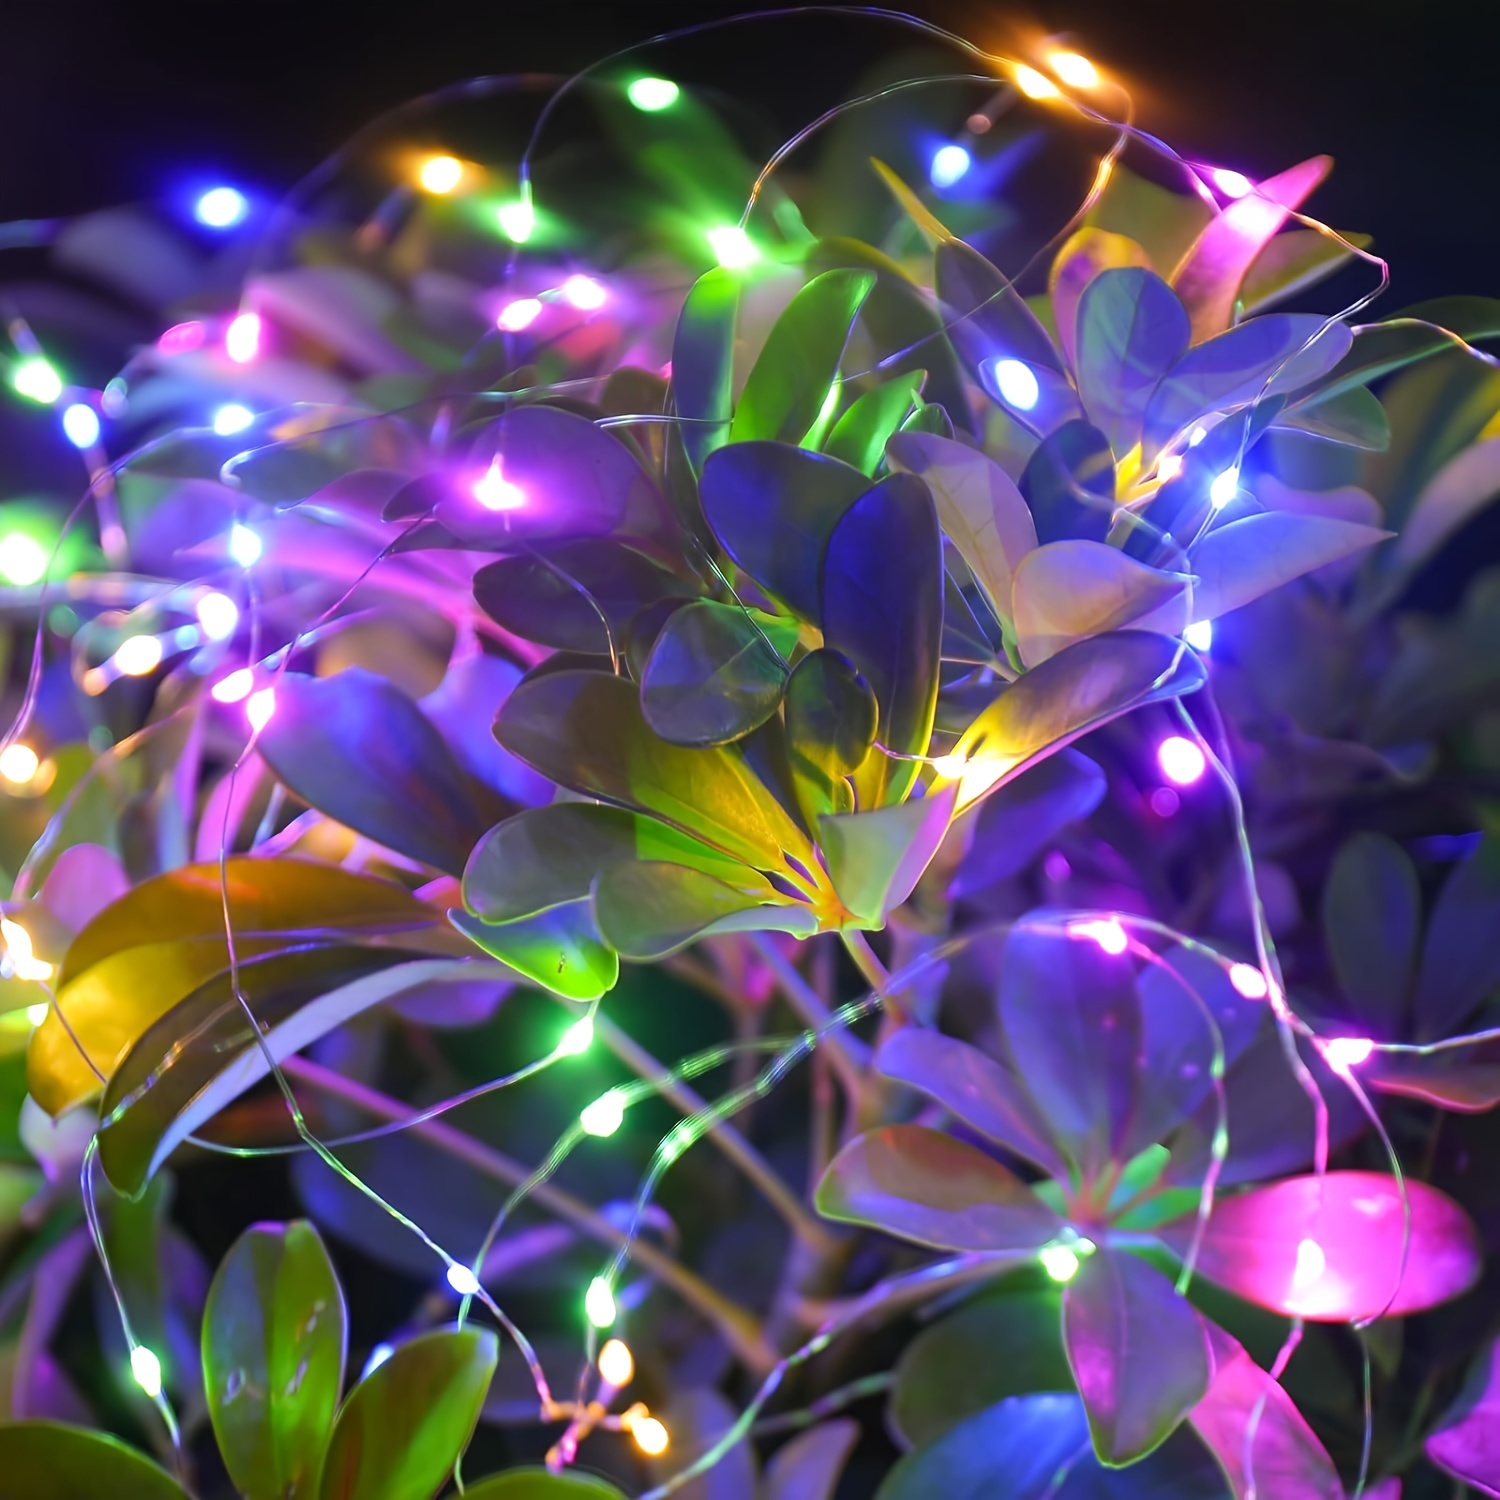 gifts, led string light 33 6633ft fairy lights usb powered warm white multicolored 100 200 leds ipx6 waterproof perfect for outdoor indoor christmas xmas tree thanksgiving day gifts garden winter decor parties weddings festivals bedroom and table decoration details 4